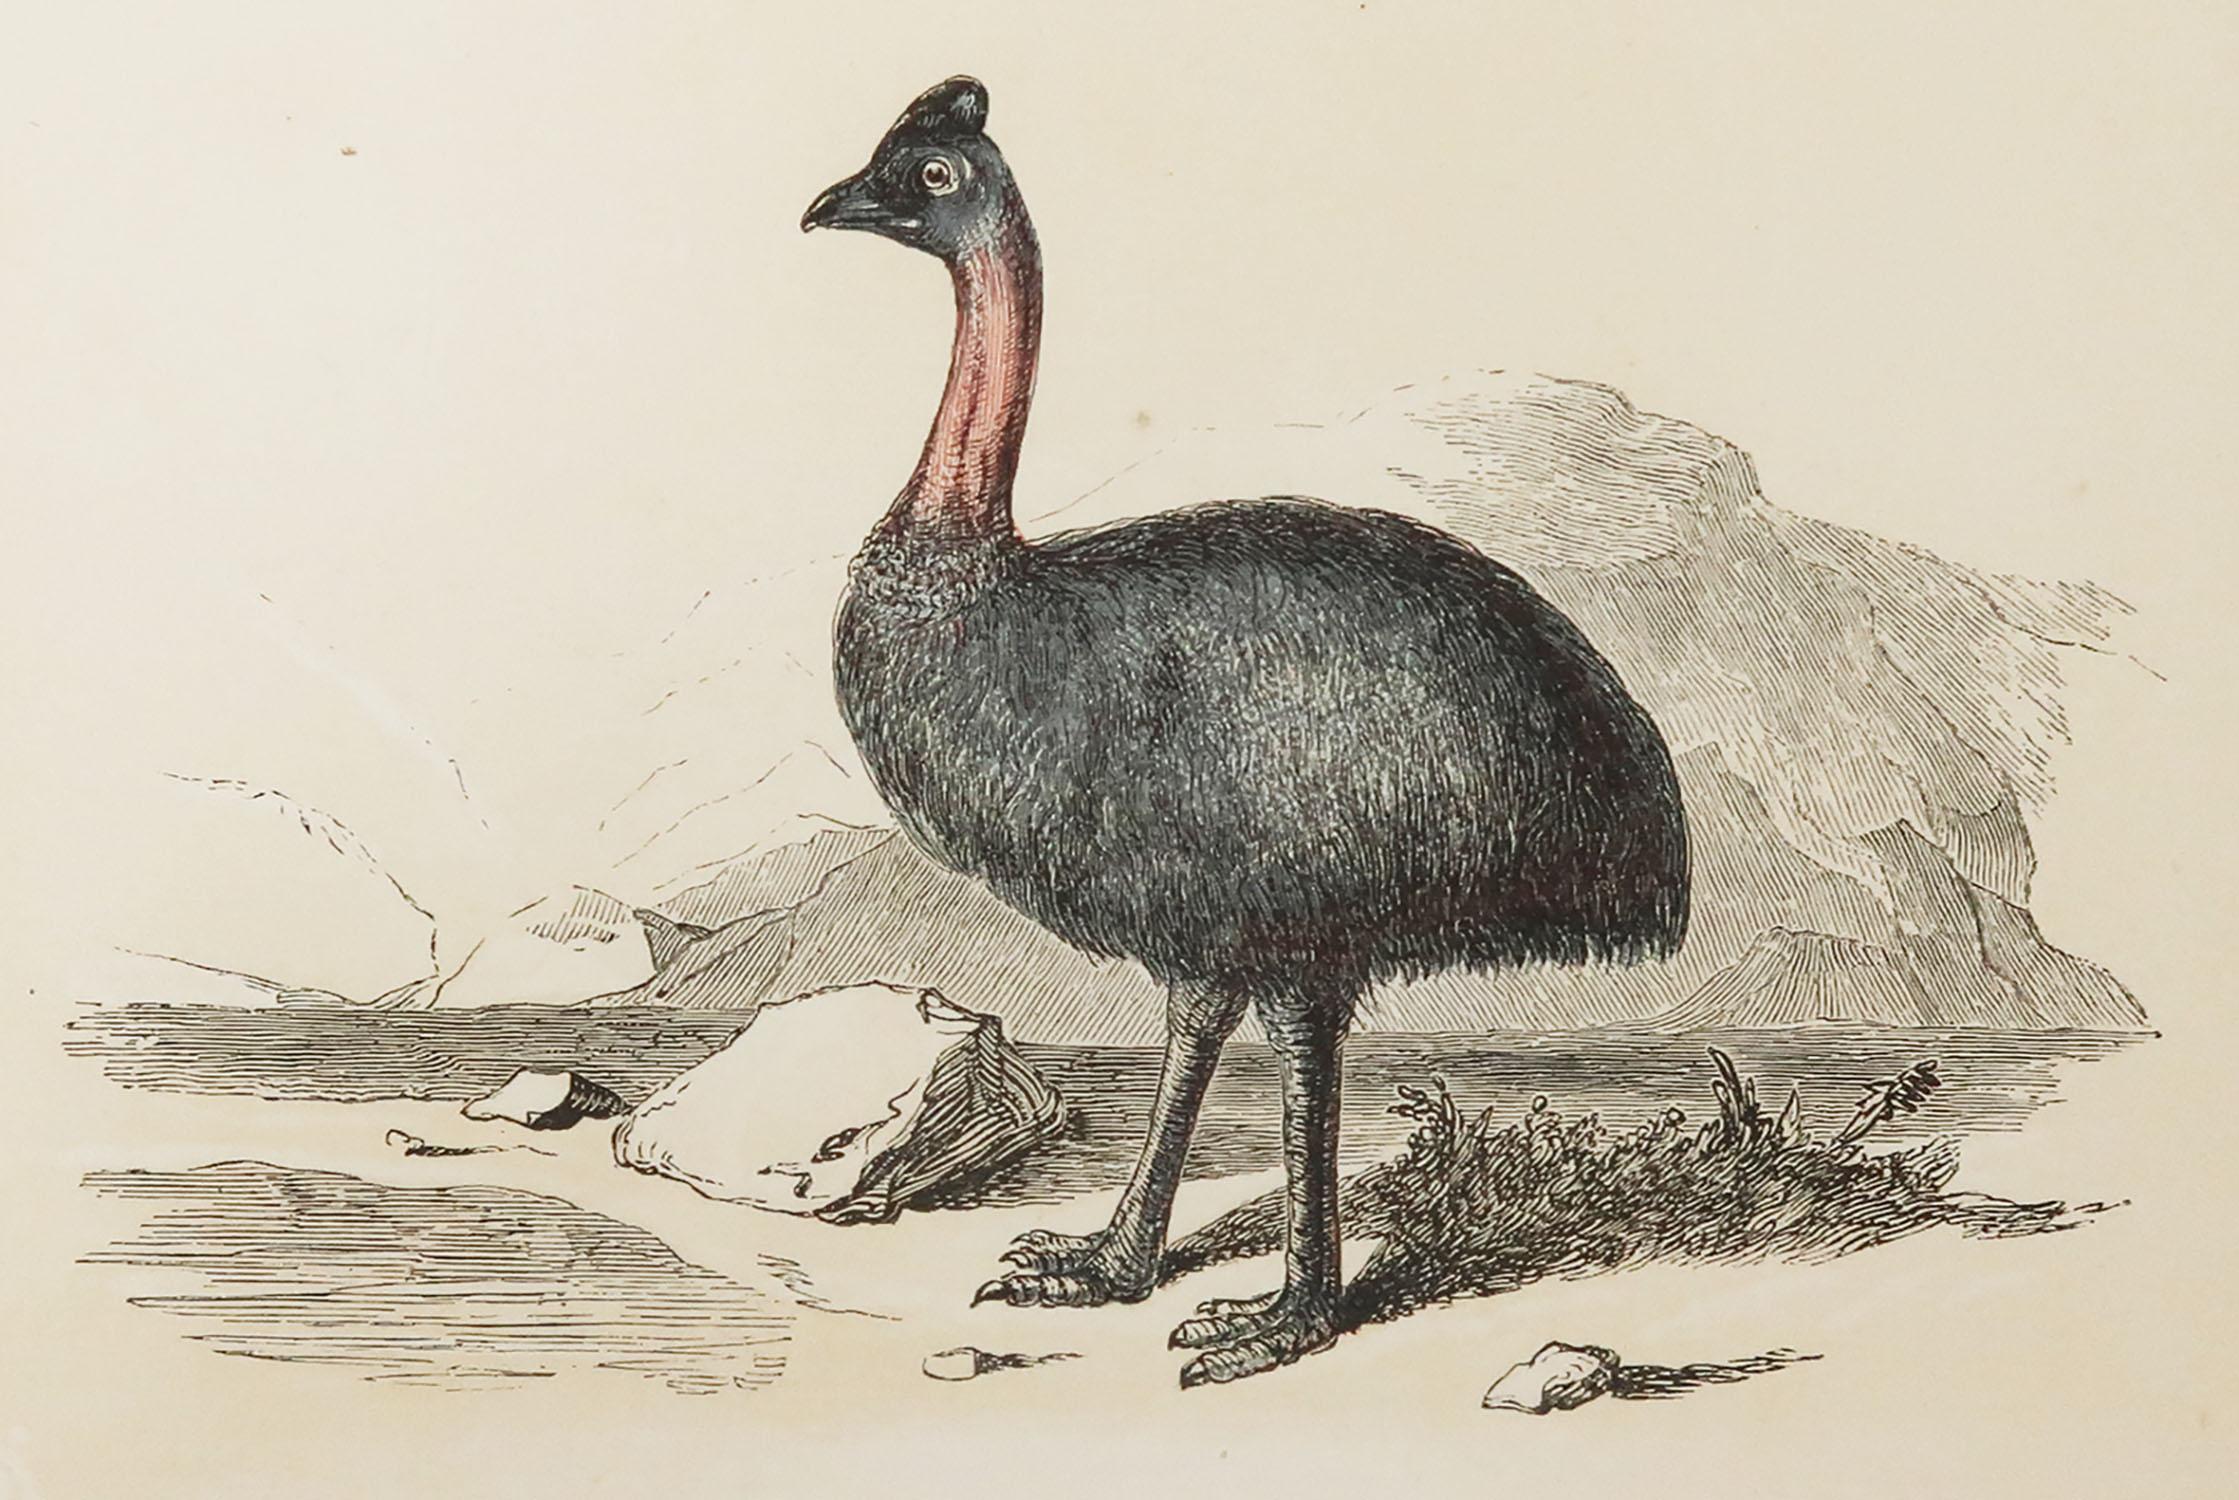 Great image of a cassowary

Unframed. It gives you the option of perhaps making a set up using your own choice of frames.

Lithograph with original color.

Published by Tallis, circa 1850

Crudely inscribed title has been erased at the